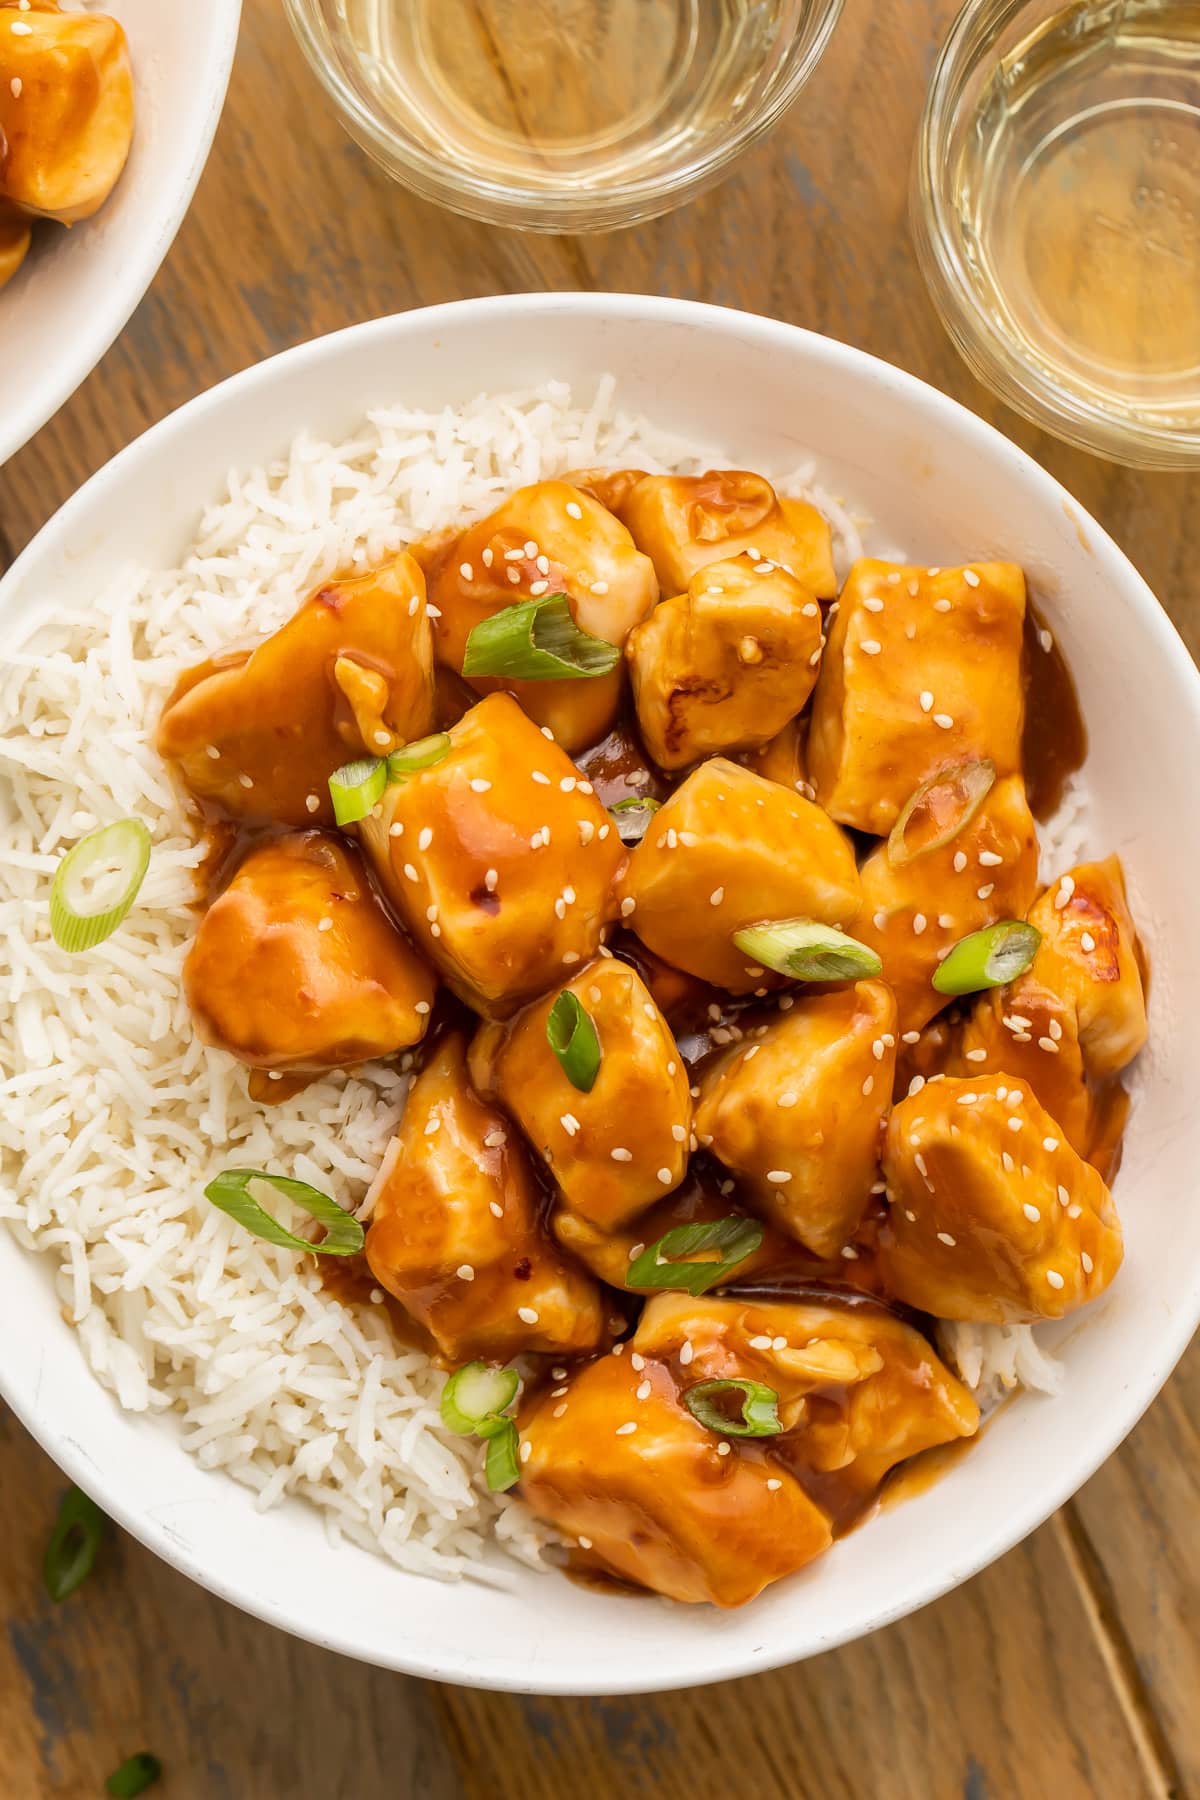 Orange glazed Instant Pot honey garlic chicken garnished with sesame seeds and sliced green onions in a bowl with white rice.